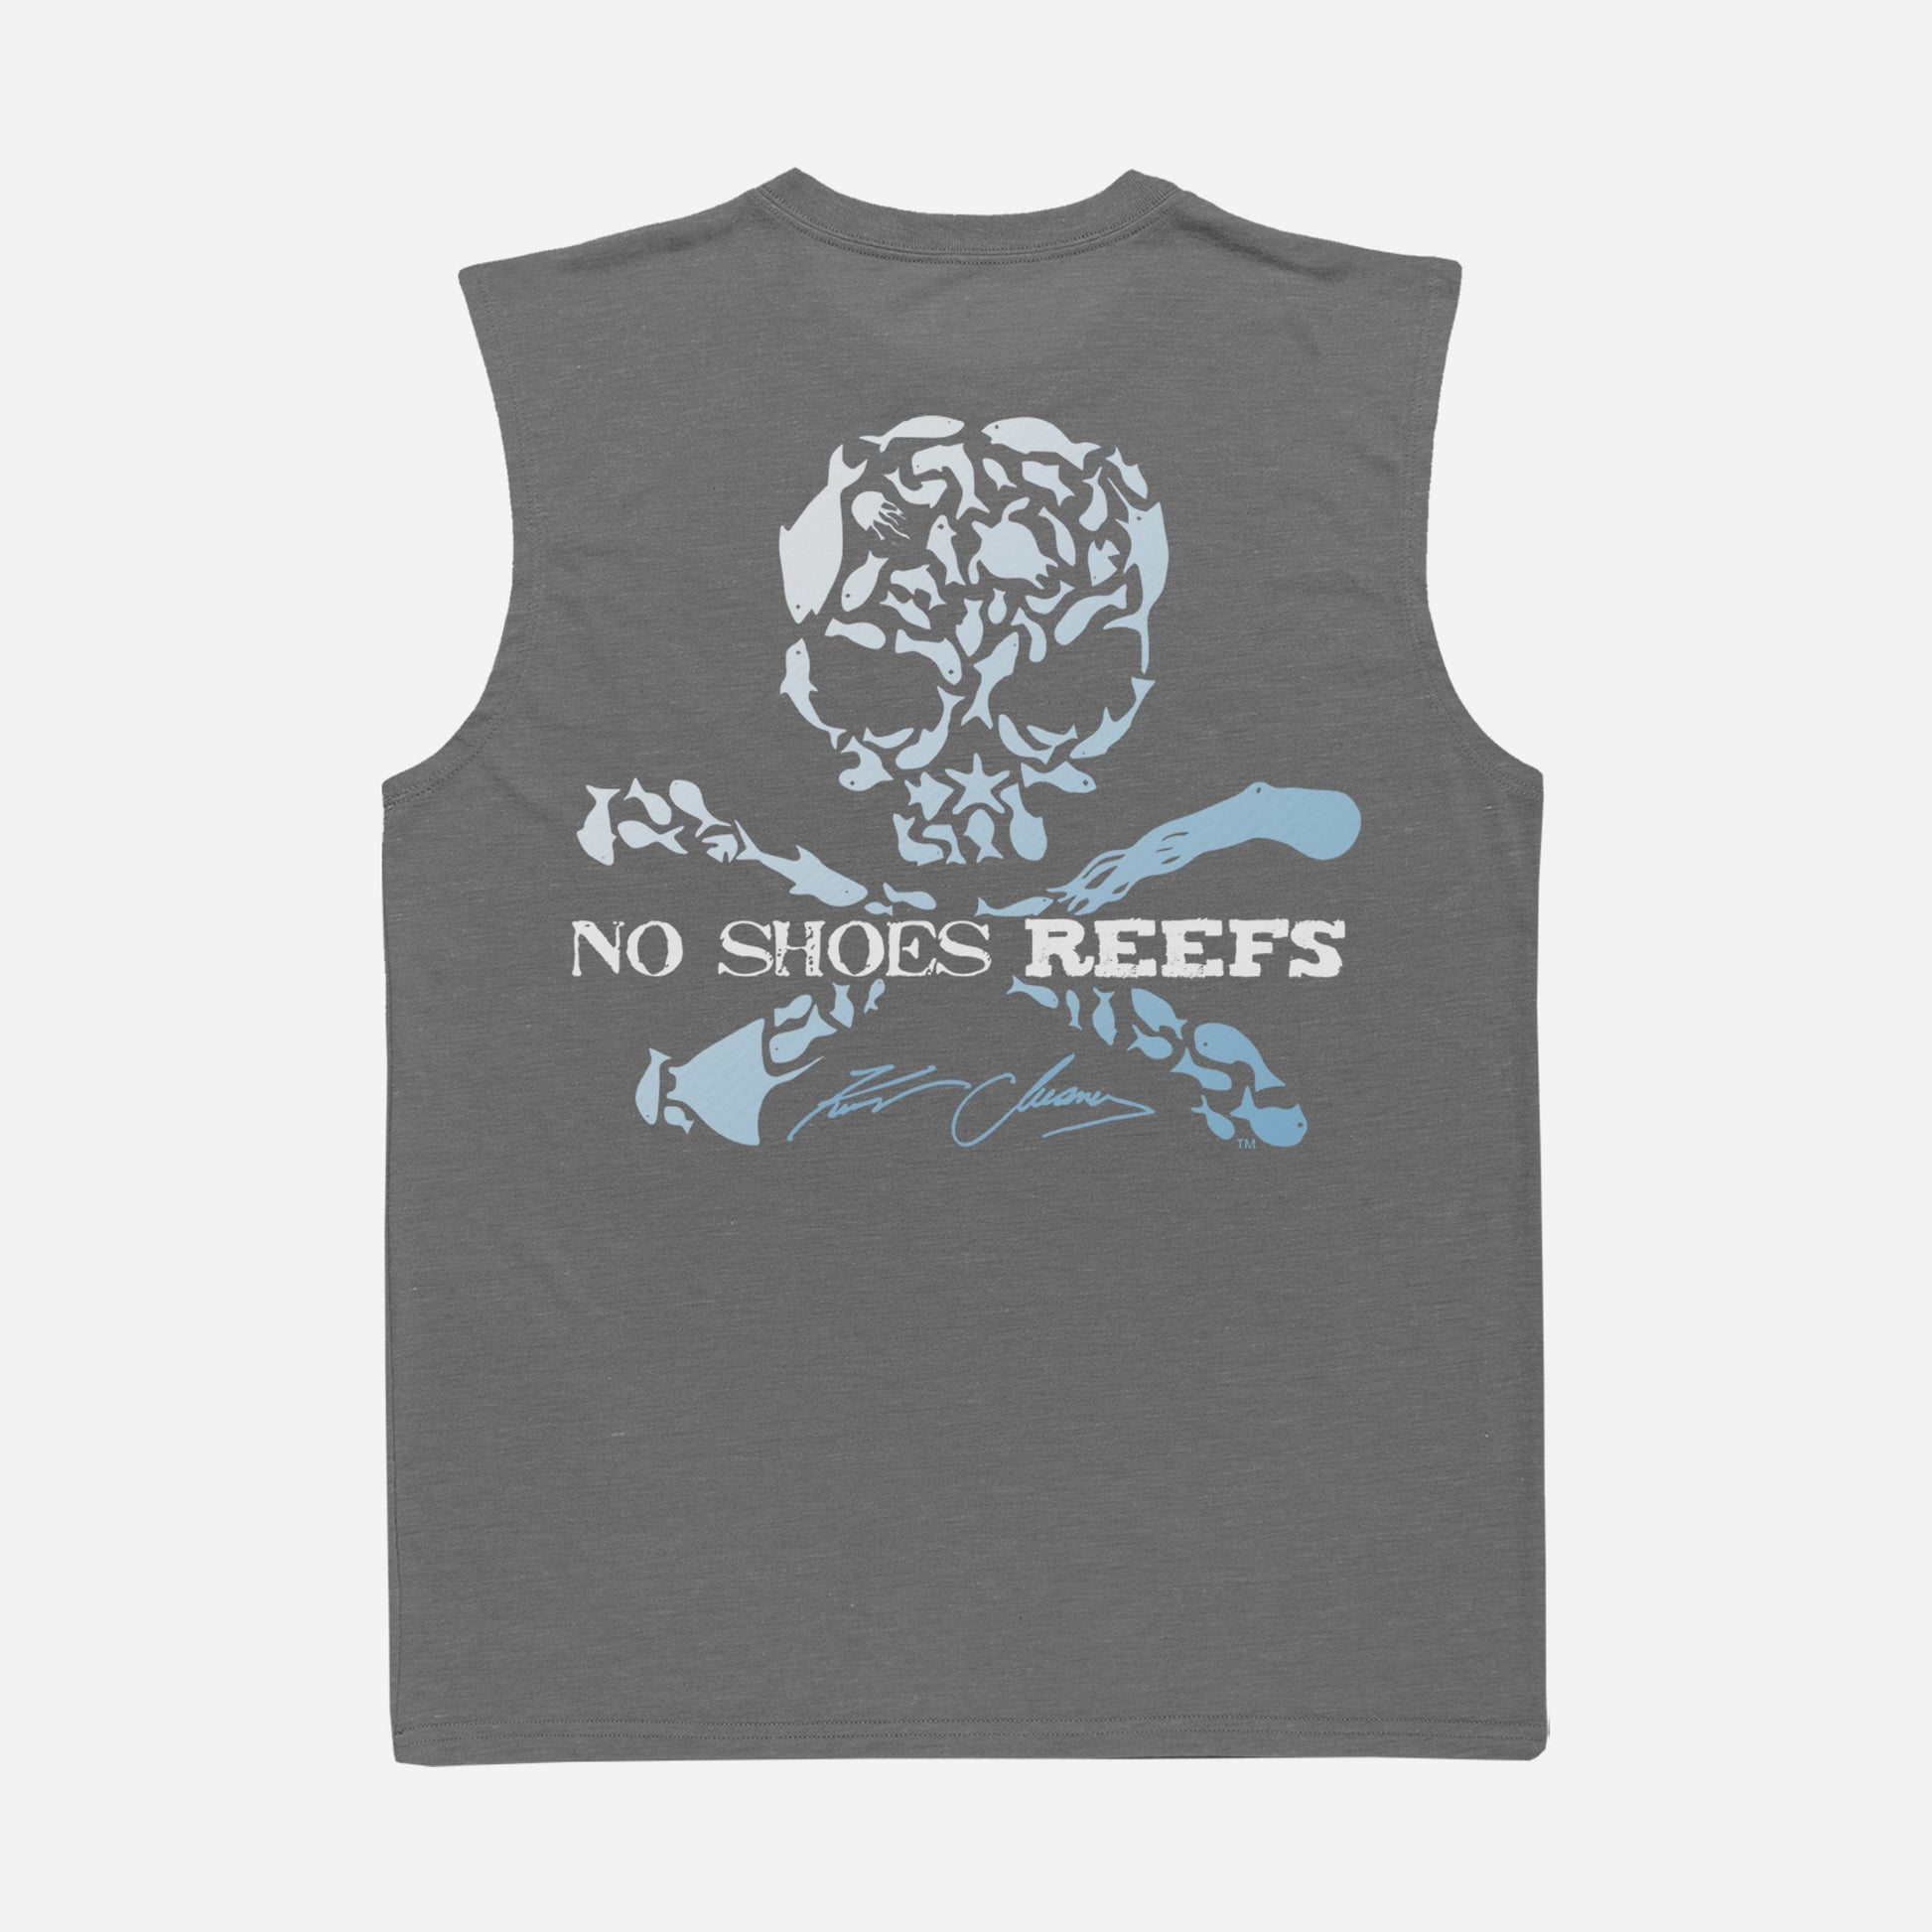 Vapor Apparel Sun Protection Kenny Chesney’s No Shoes Reefs “Sleeve Eater”